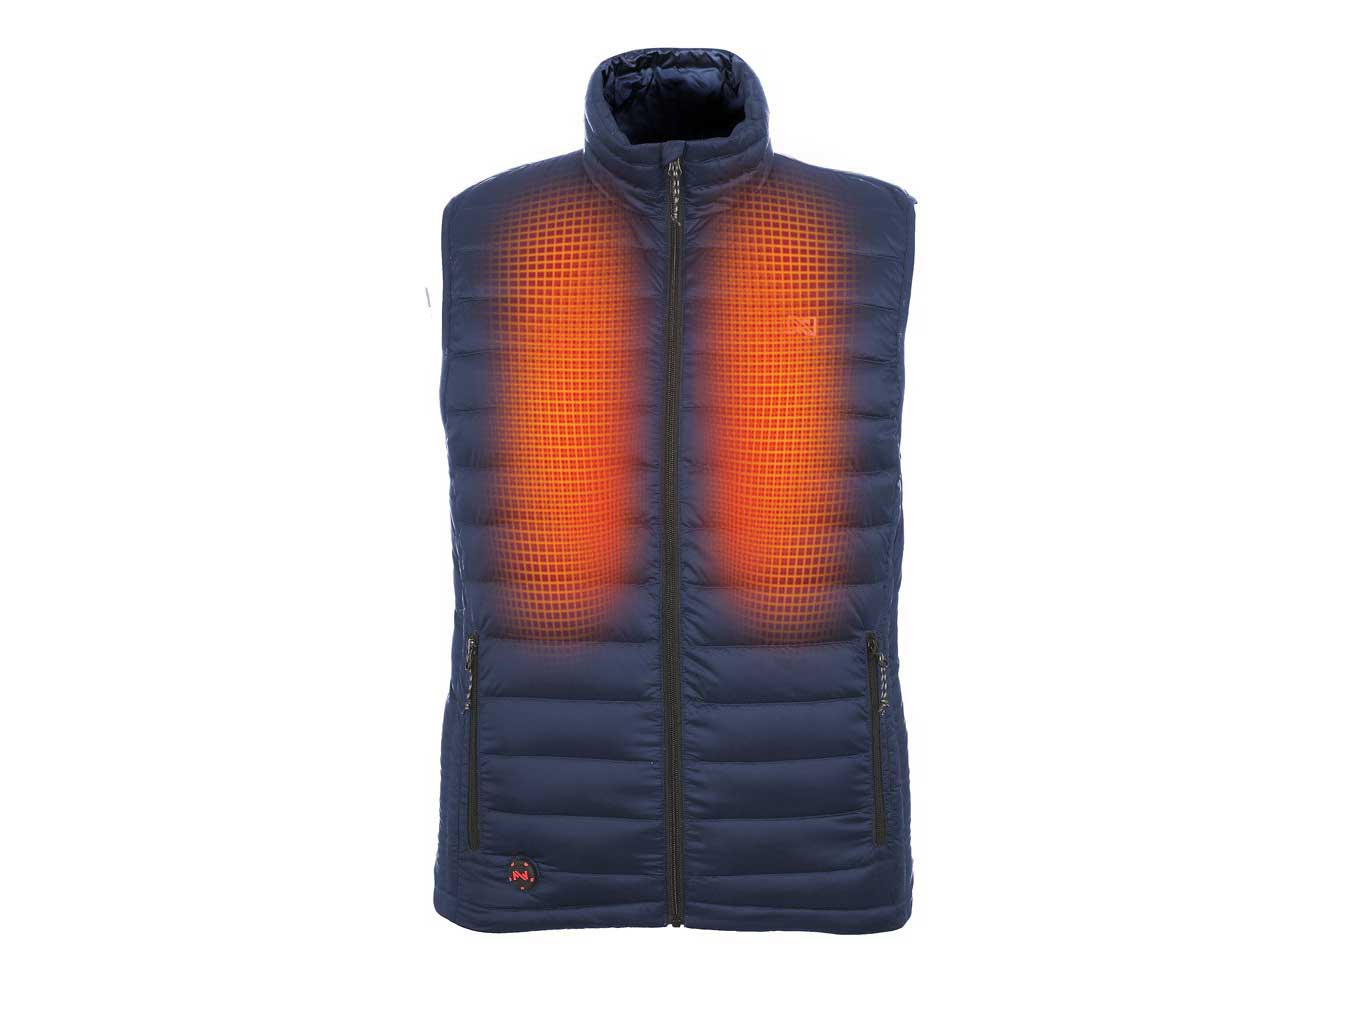 Mobile Warming Primer Shirt And Summit Vest Review